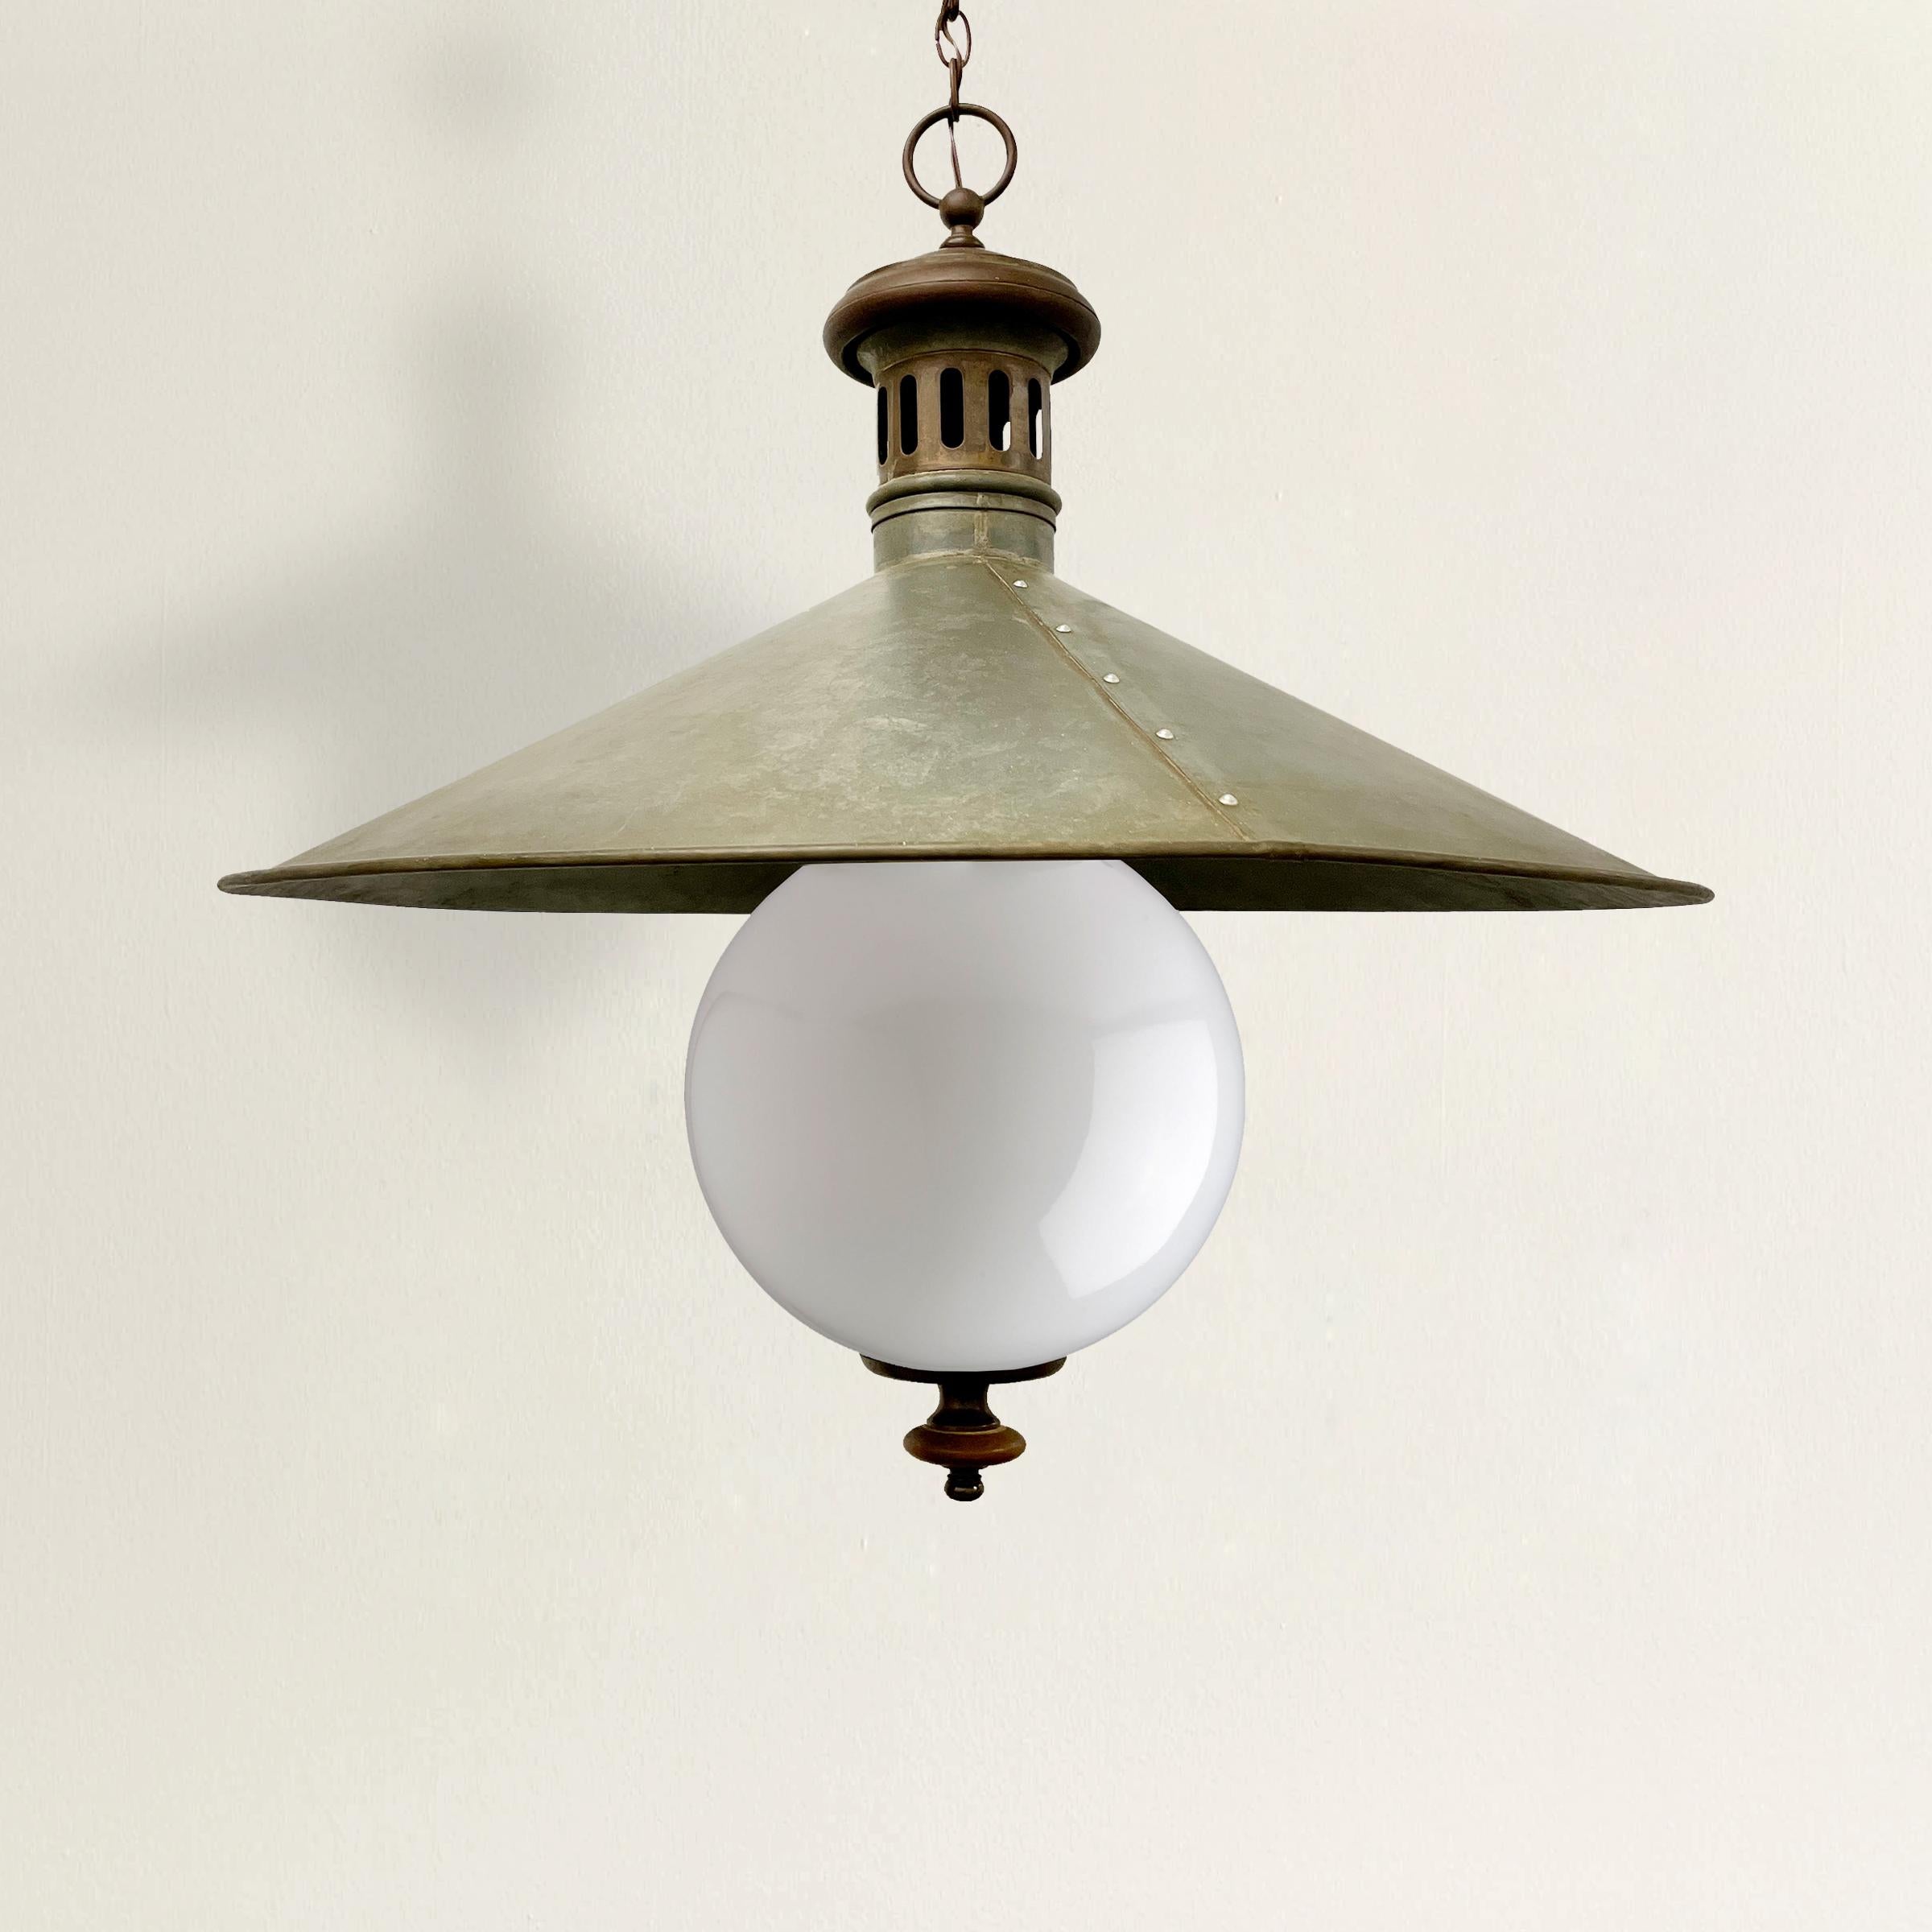 A beautiful and striking 19th century English railroad light fixture with a large round conical zinc shade, copper fittings, and a large opaque white glass shade. This fixture originally would have used gas, but it has been retrofitted for